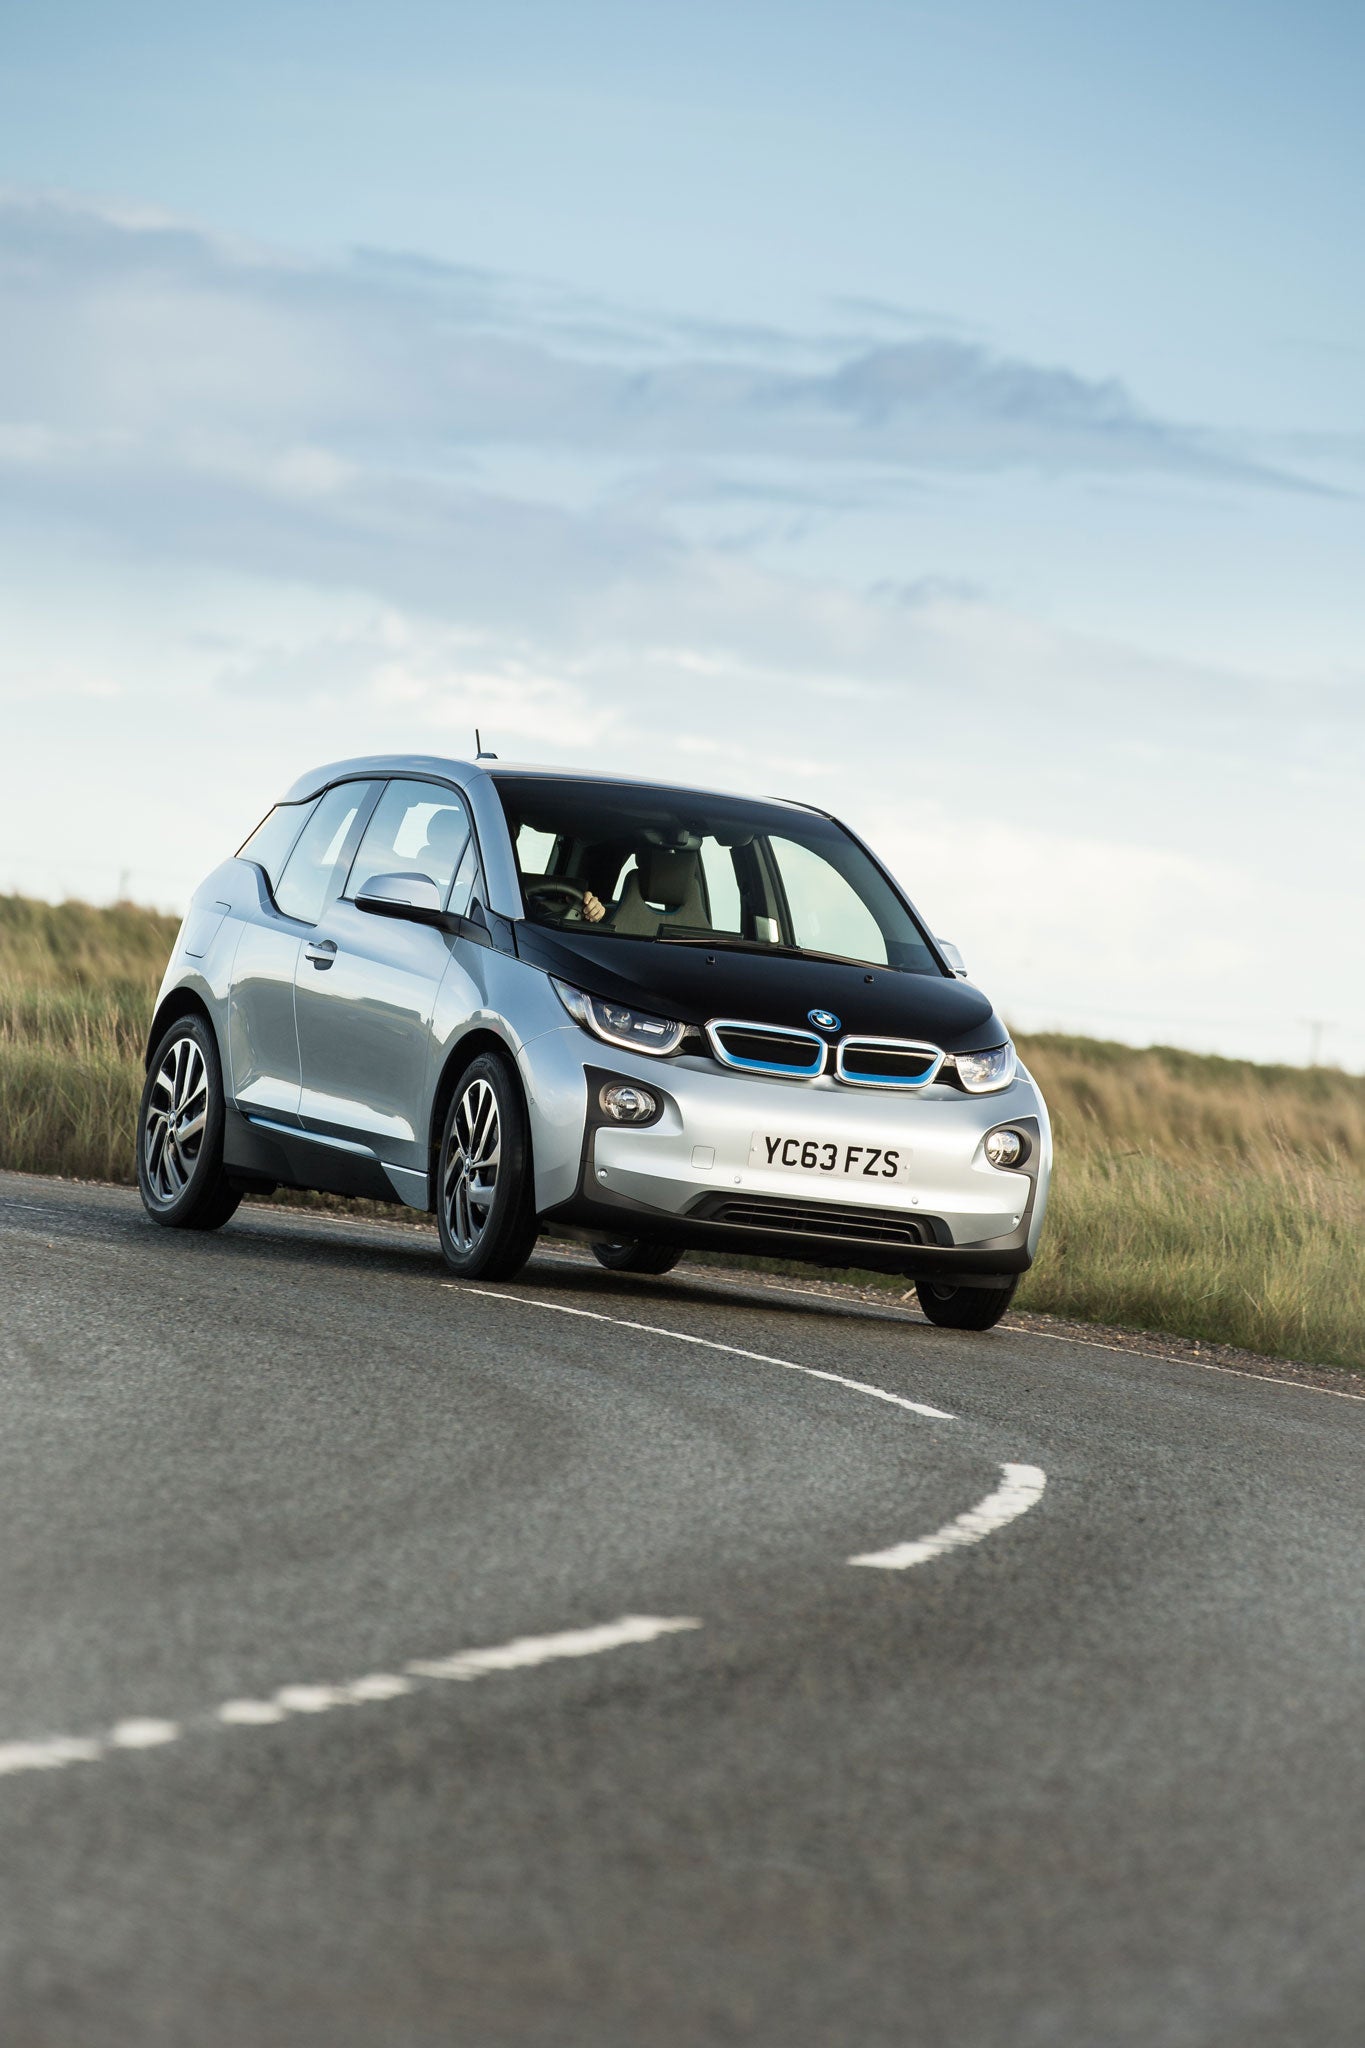 The i3 steers, rides and handles corners as you would expect of a small BMW